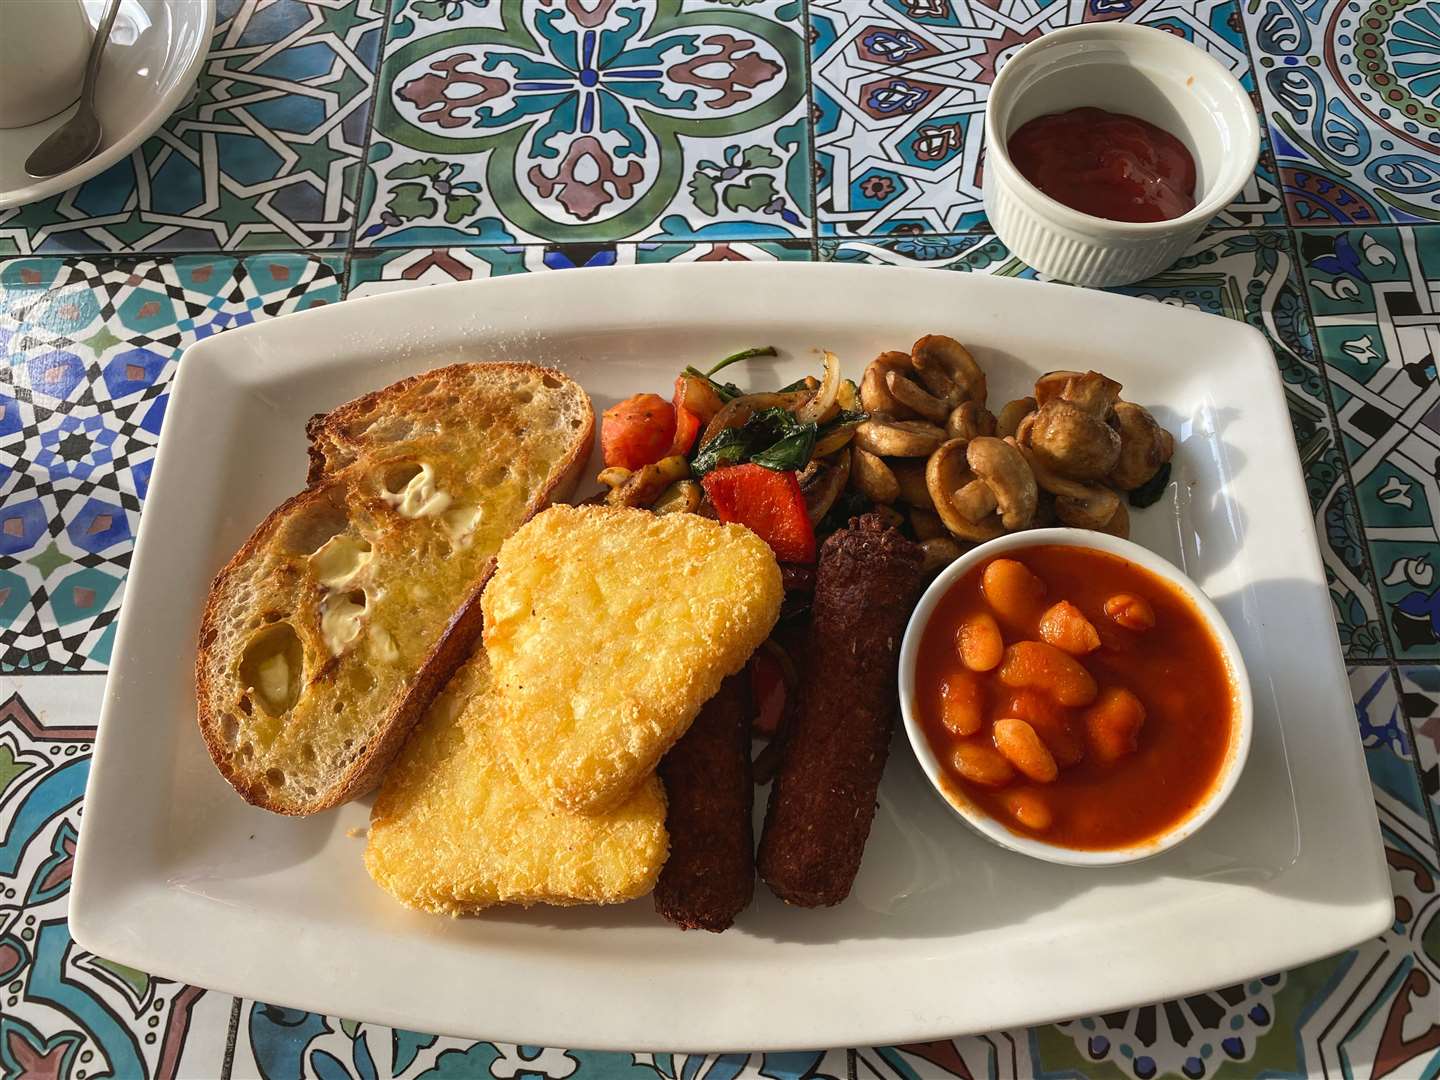 The vegan breakfast is certainly a filling way to start your day